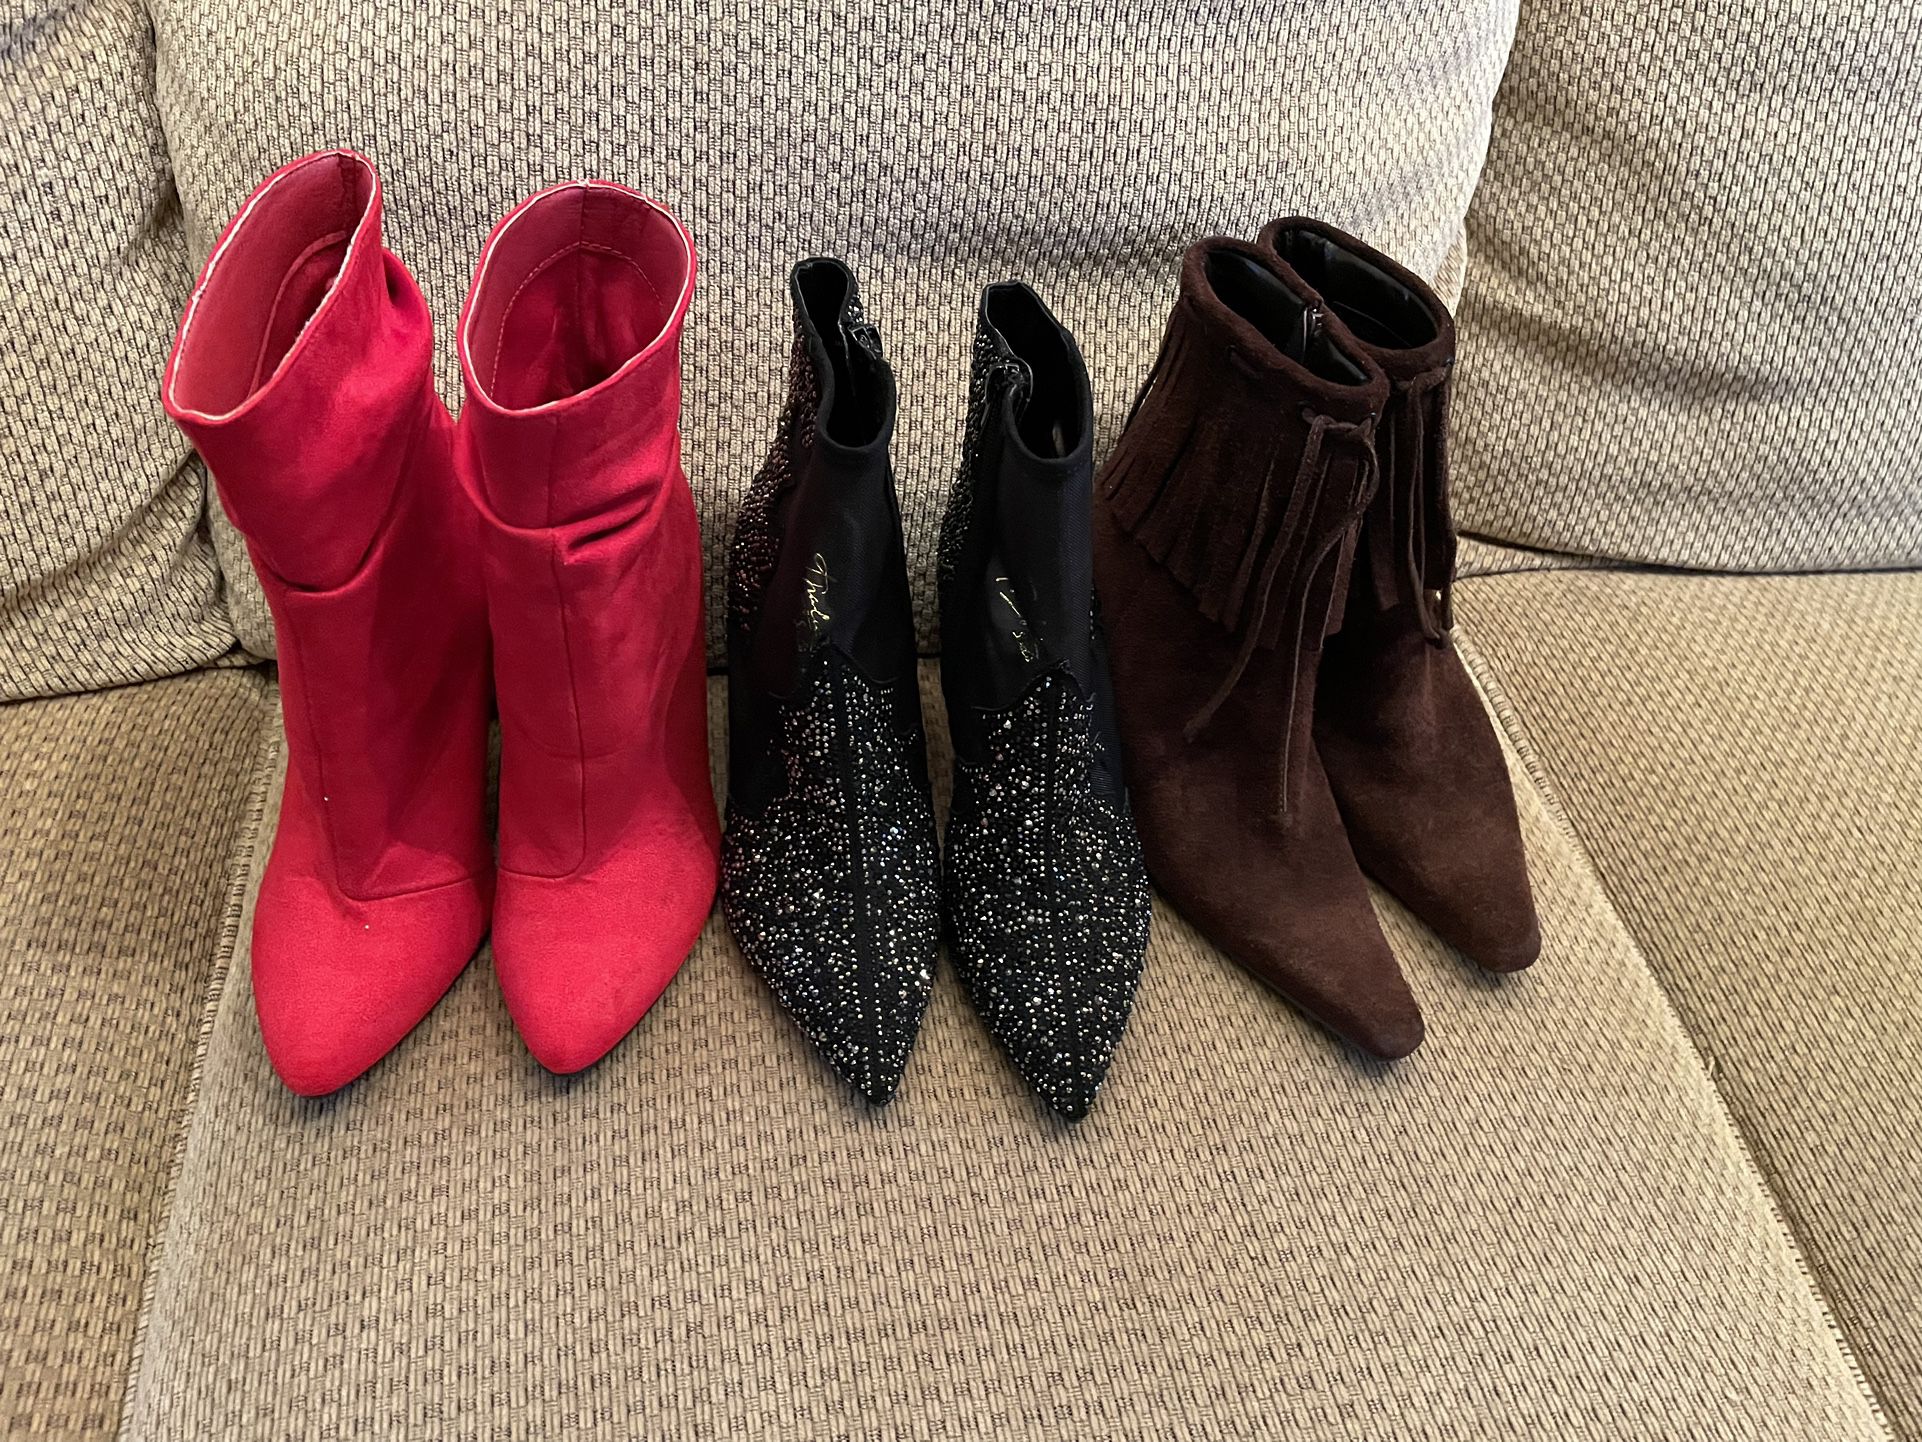 Size 6 Ladies Boots Like New